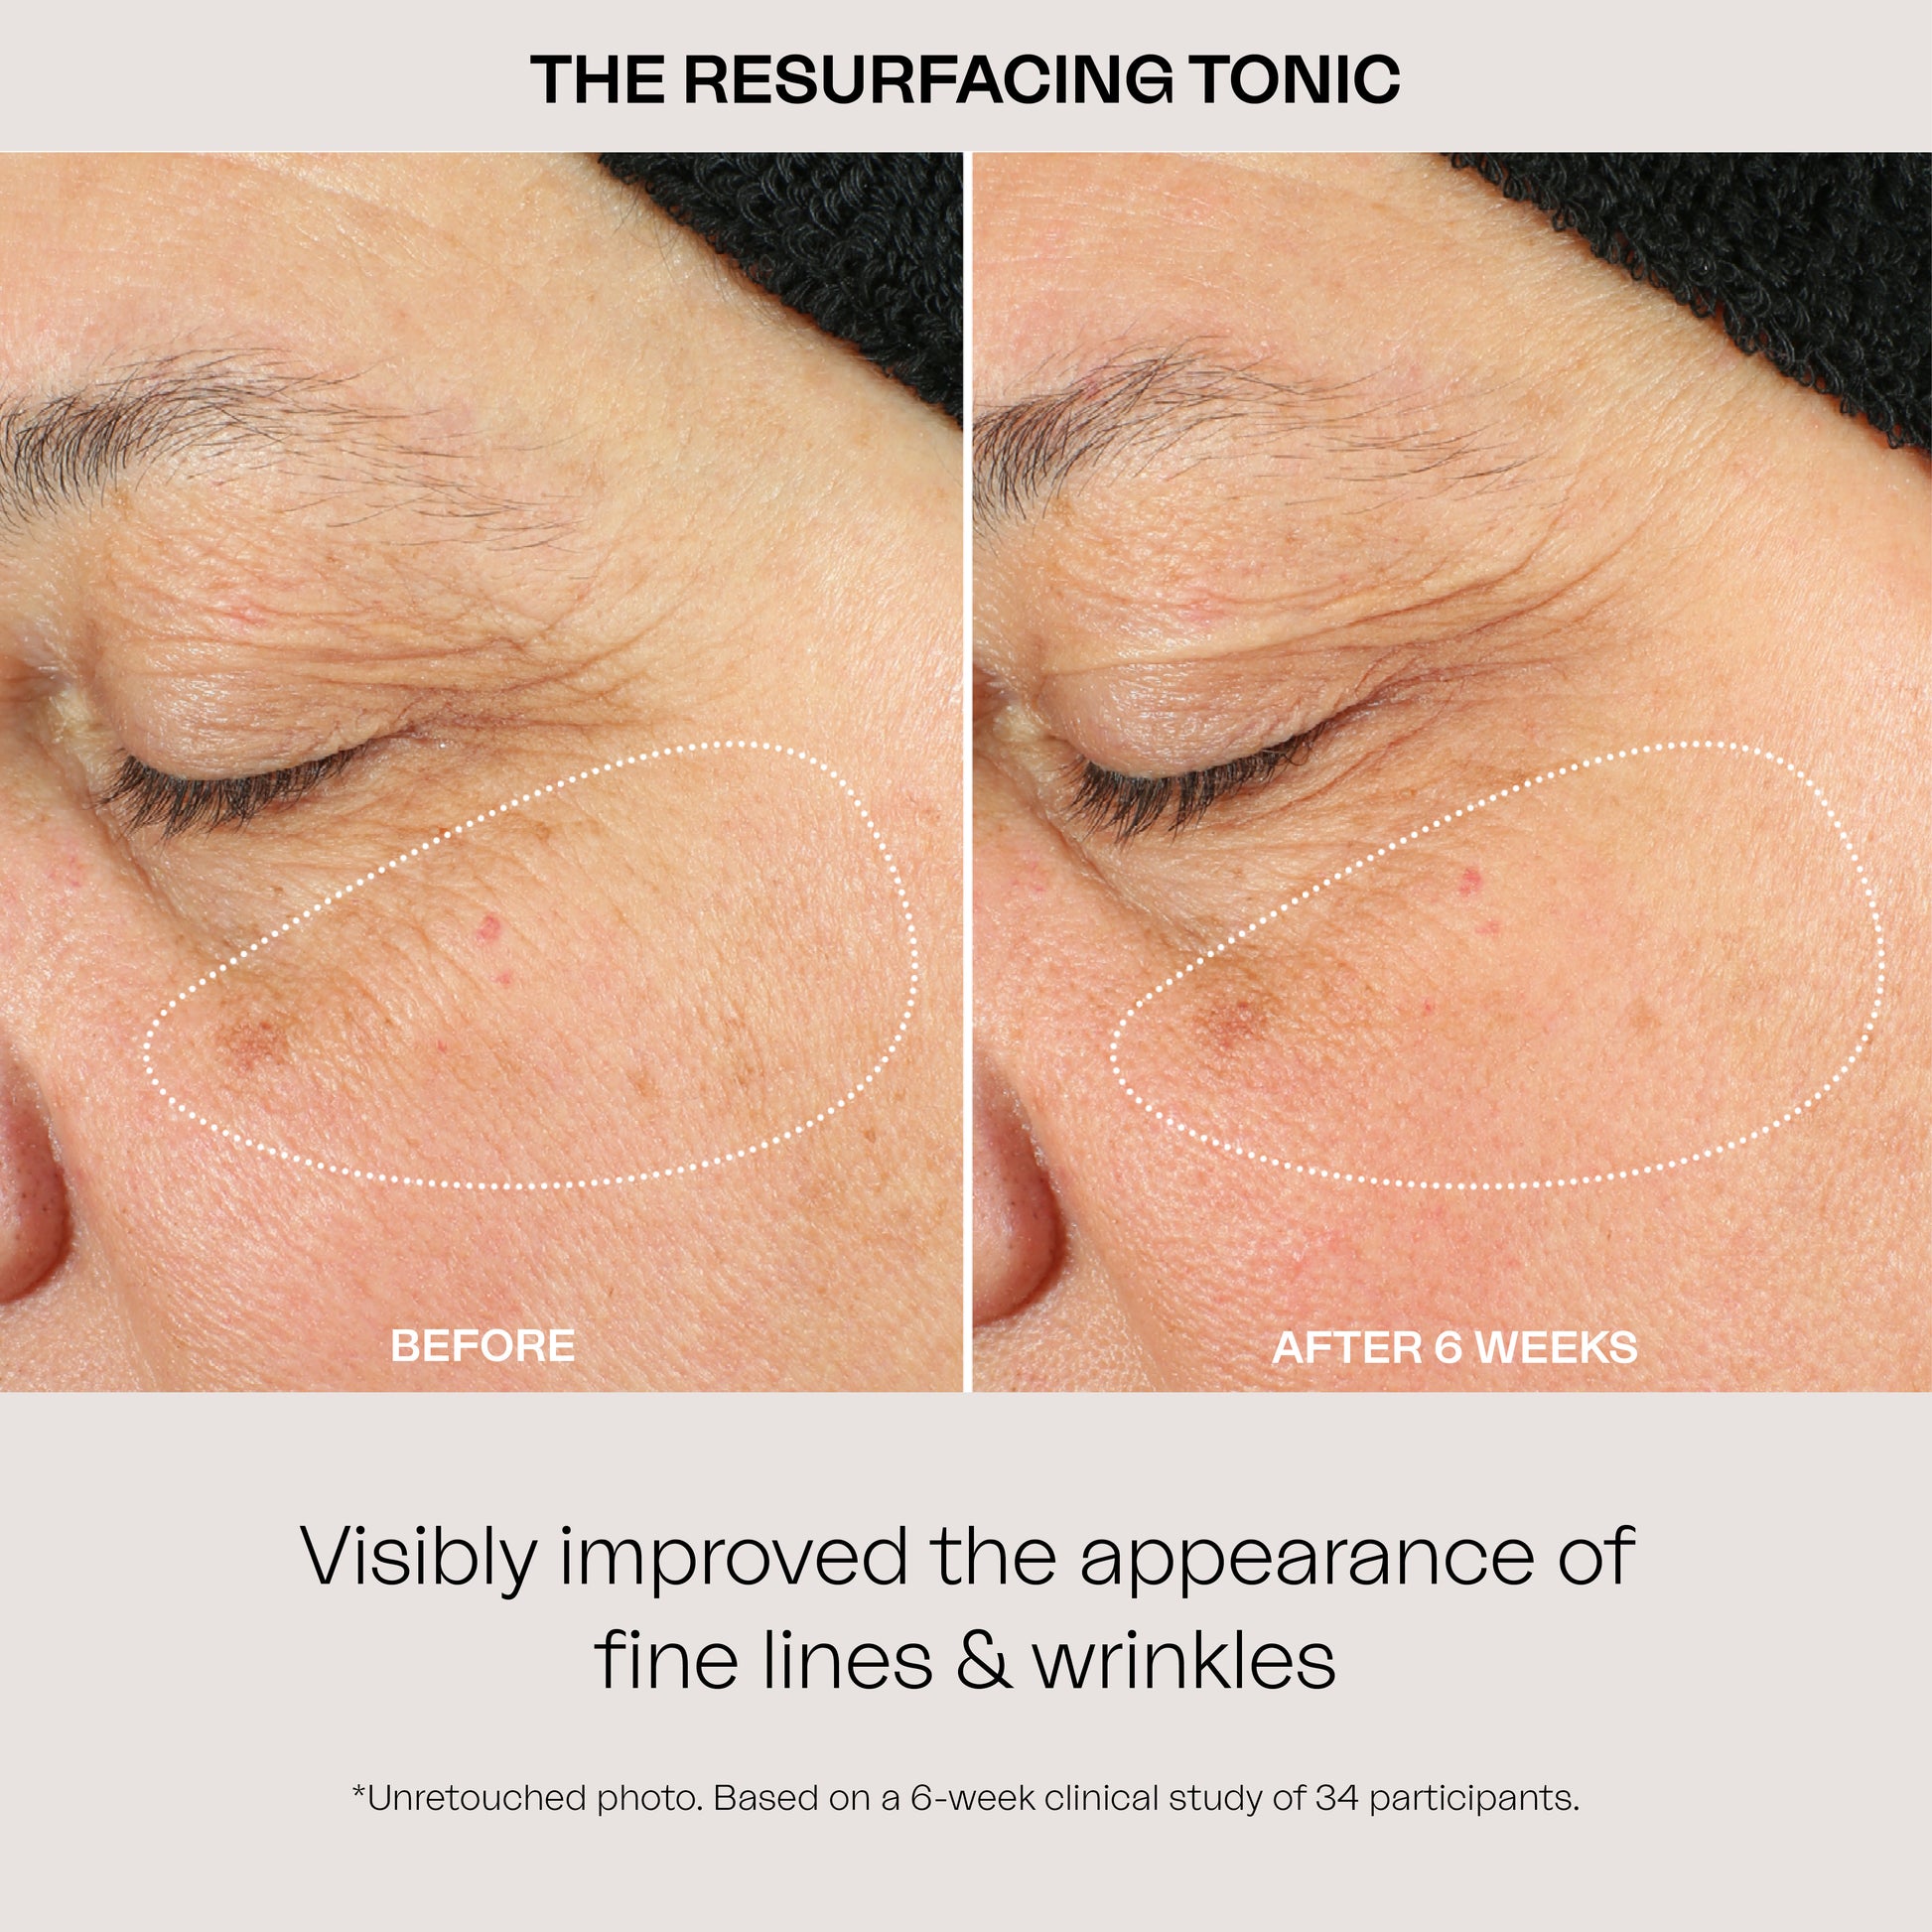 Eighth Day Skin The Resurfacing Tonic Visibly improved the appearance of fine lines and wrinkles.